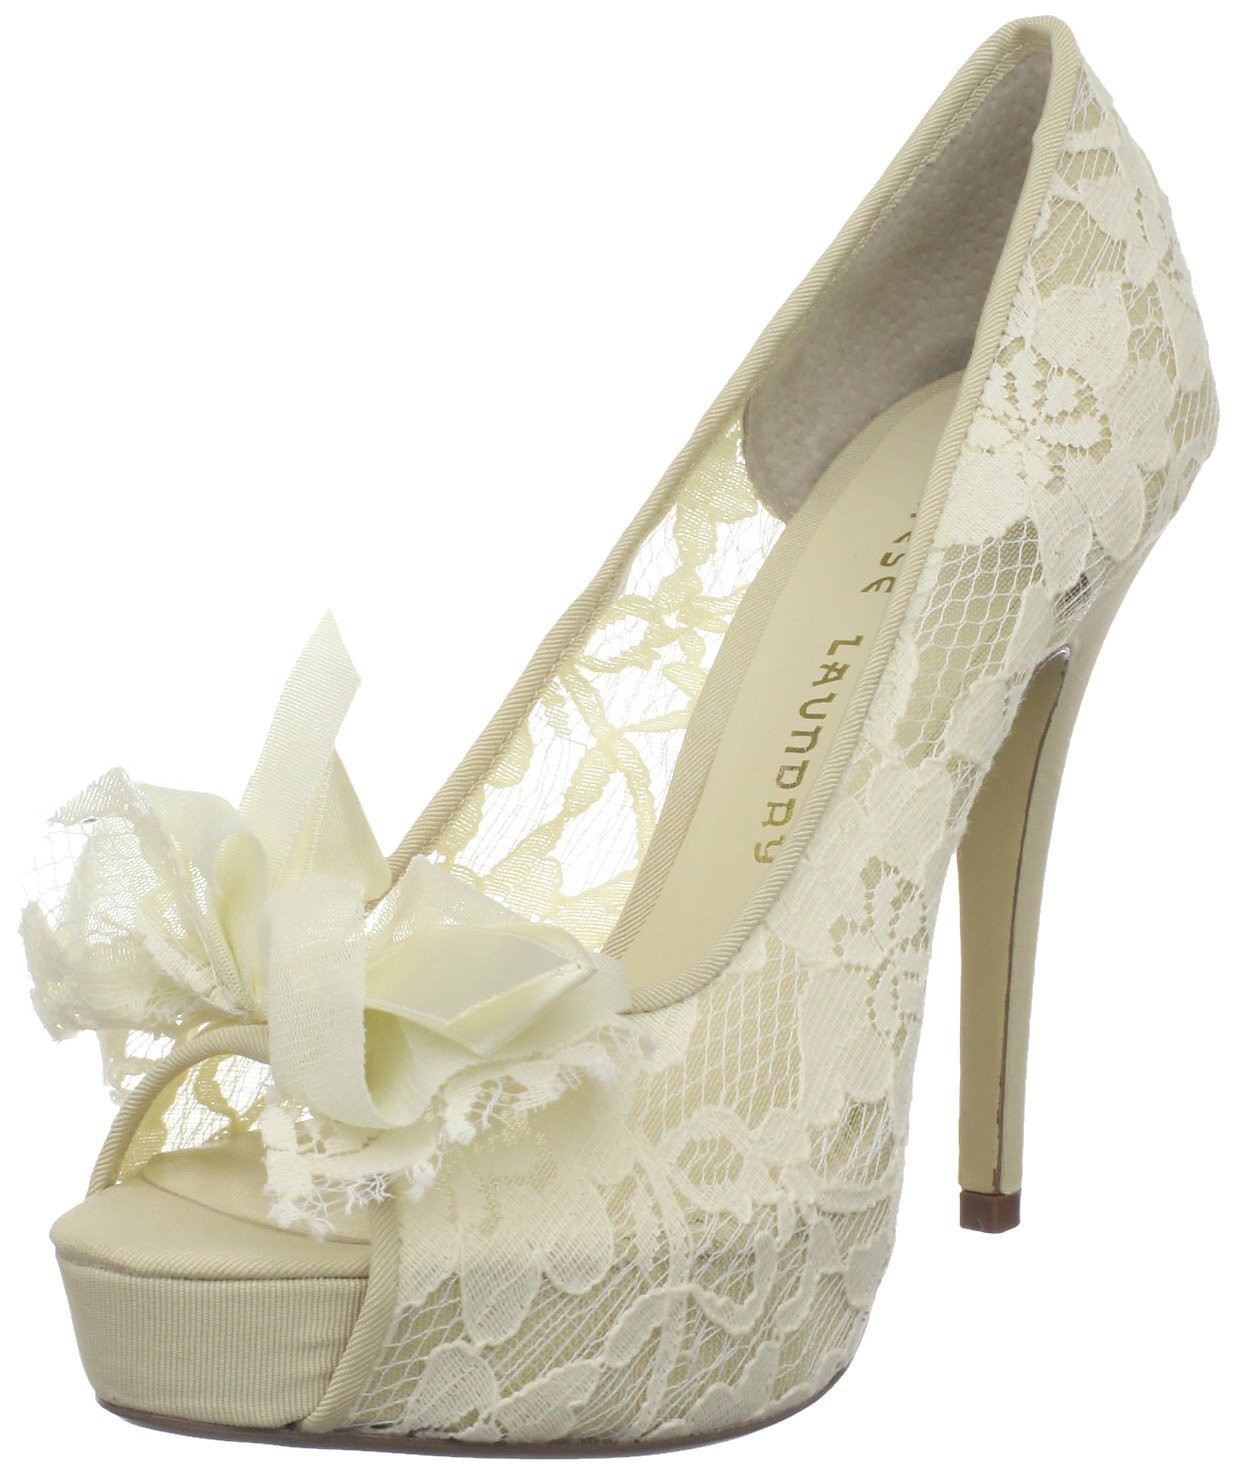 Wedding Shoes With Lace
 301 Moved Permanently